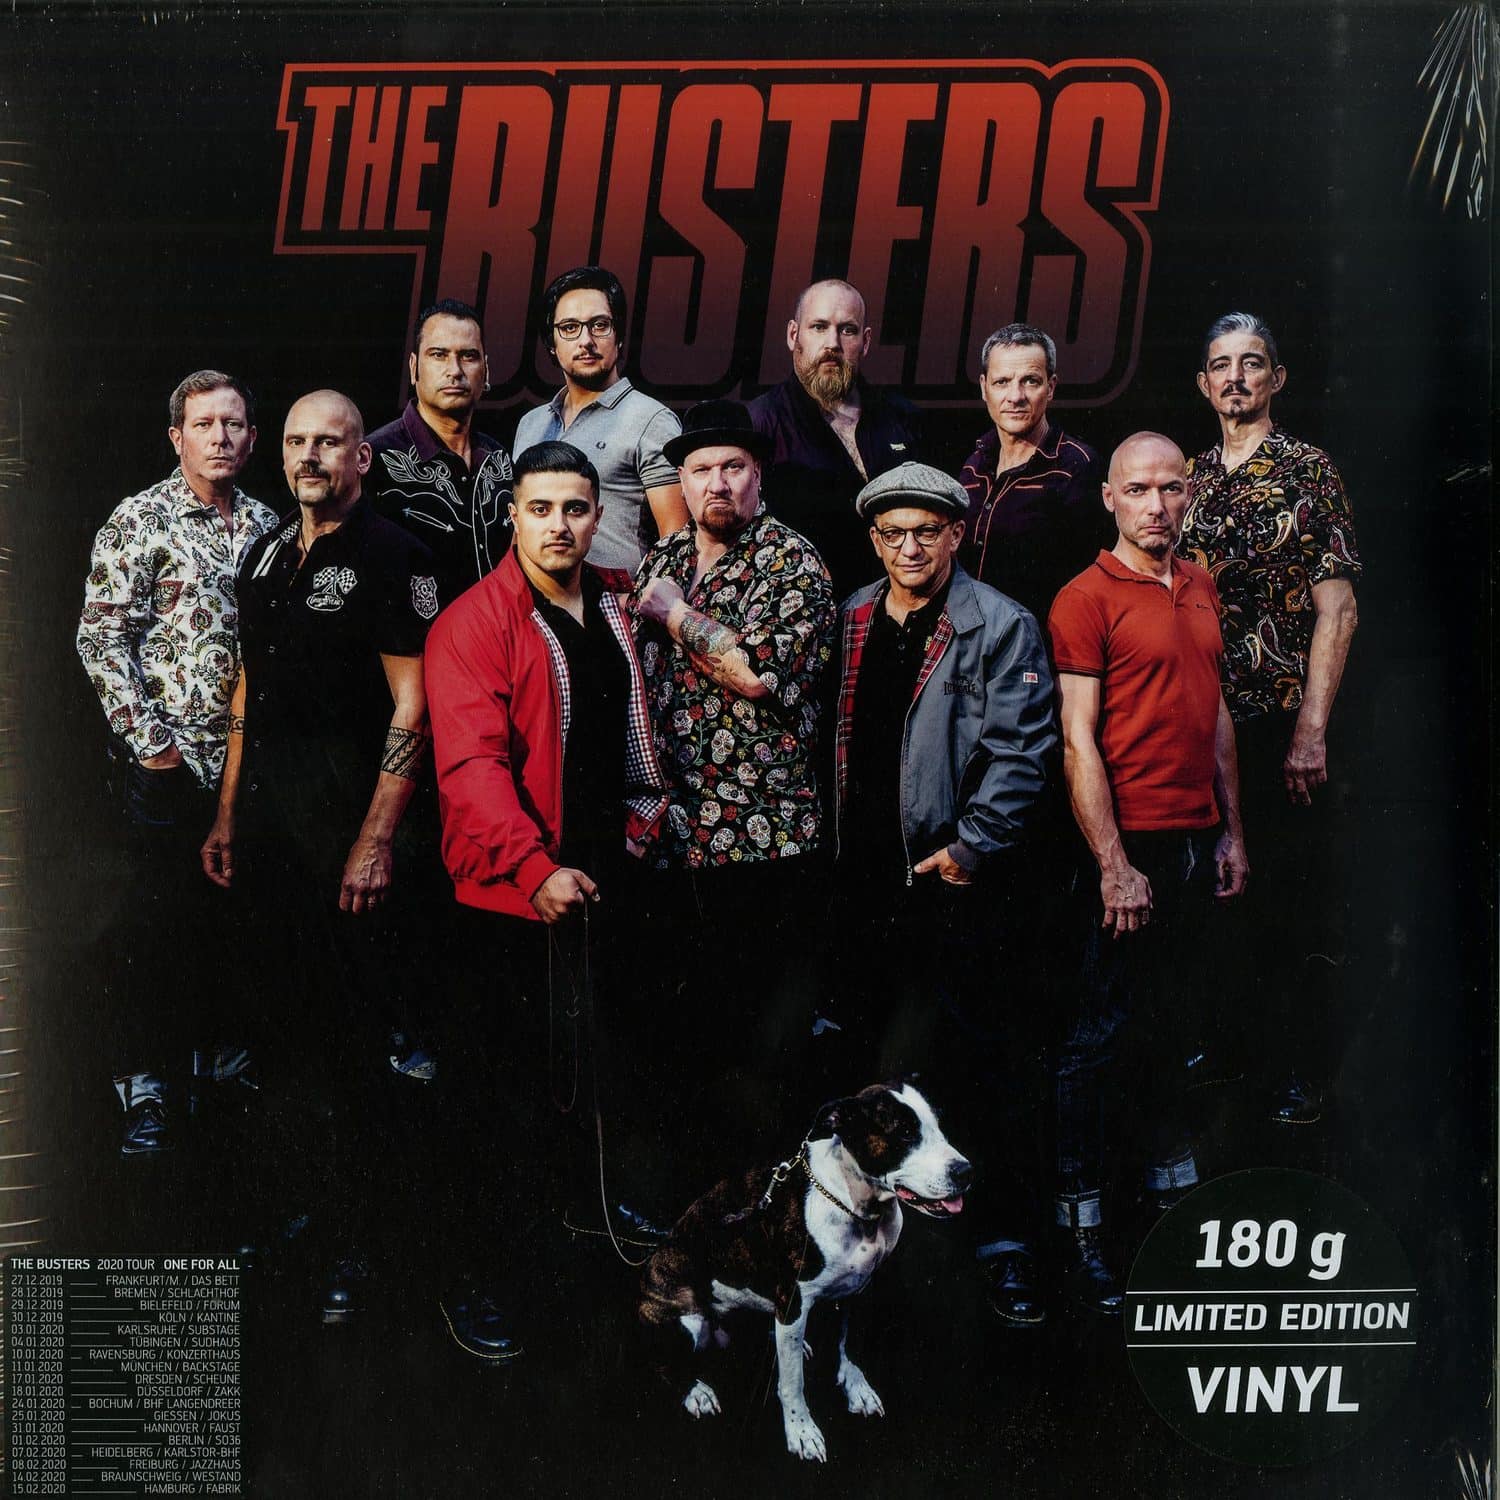 The Busters - THE BUSTERS 